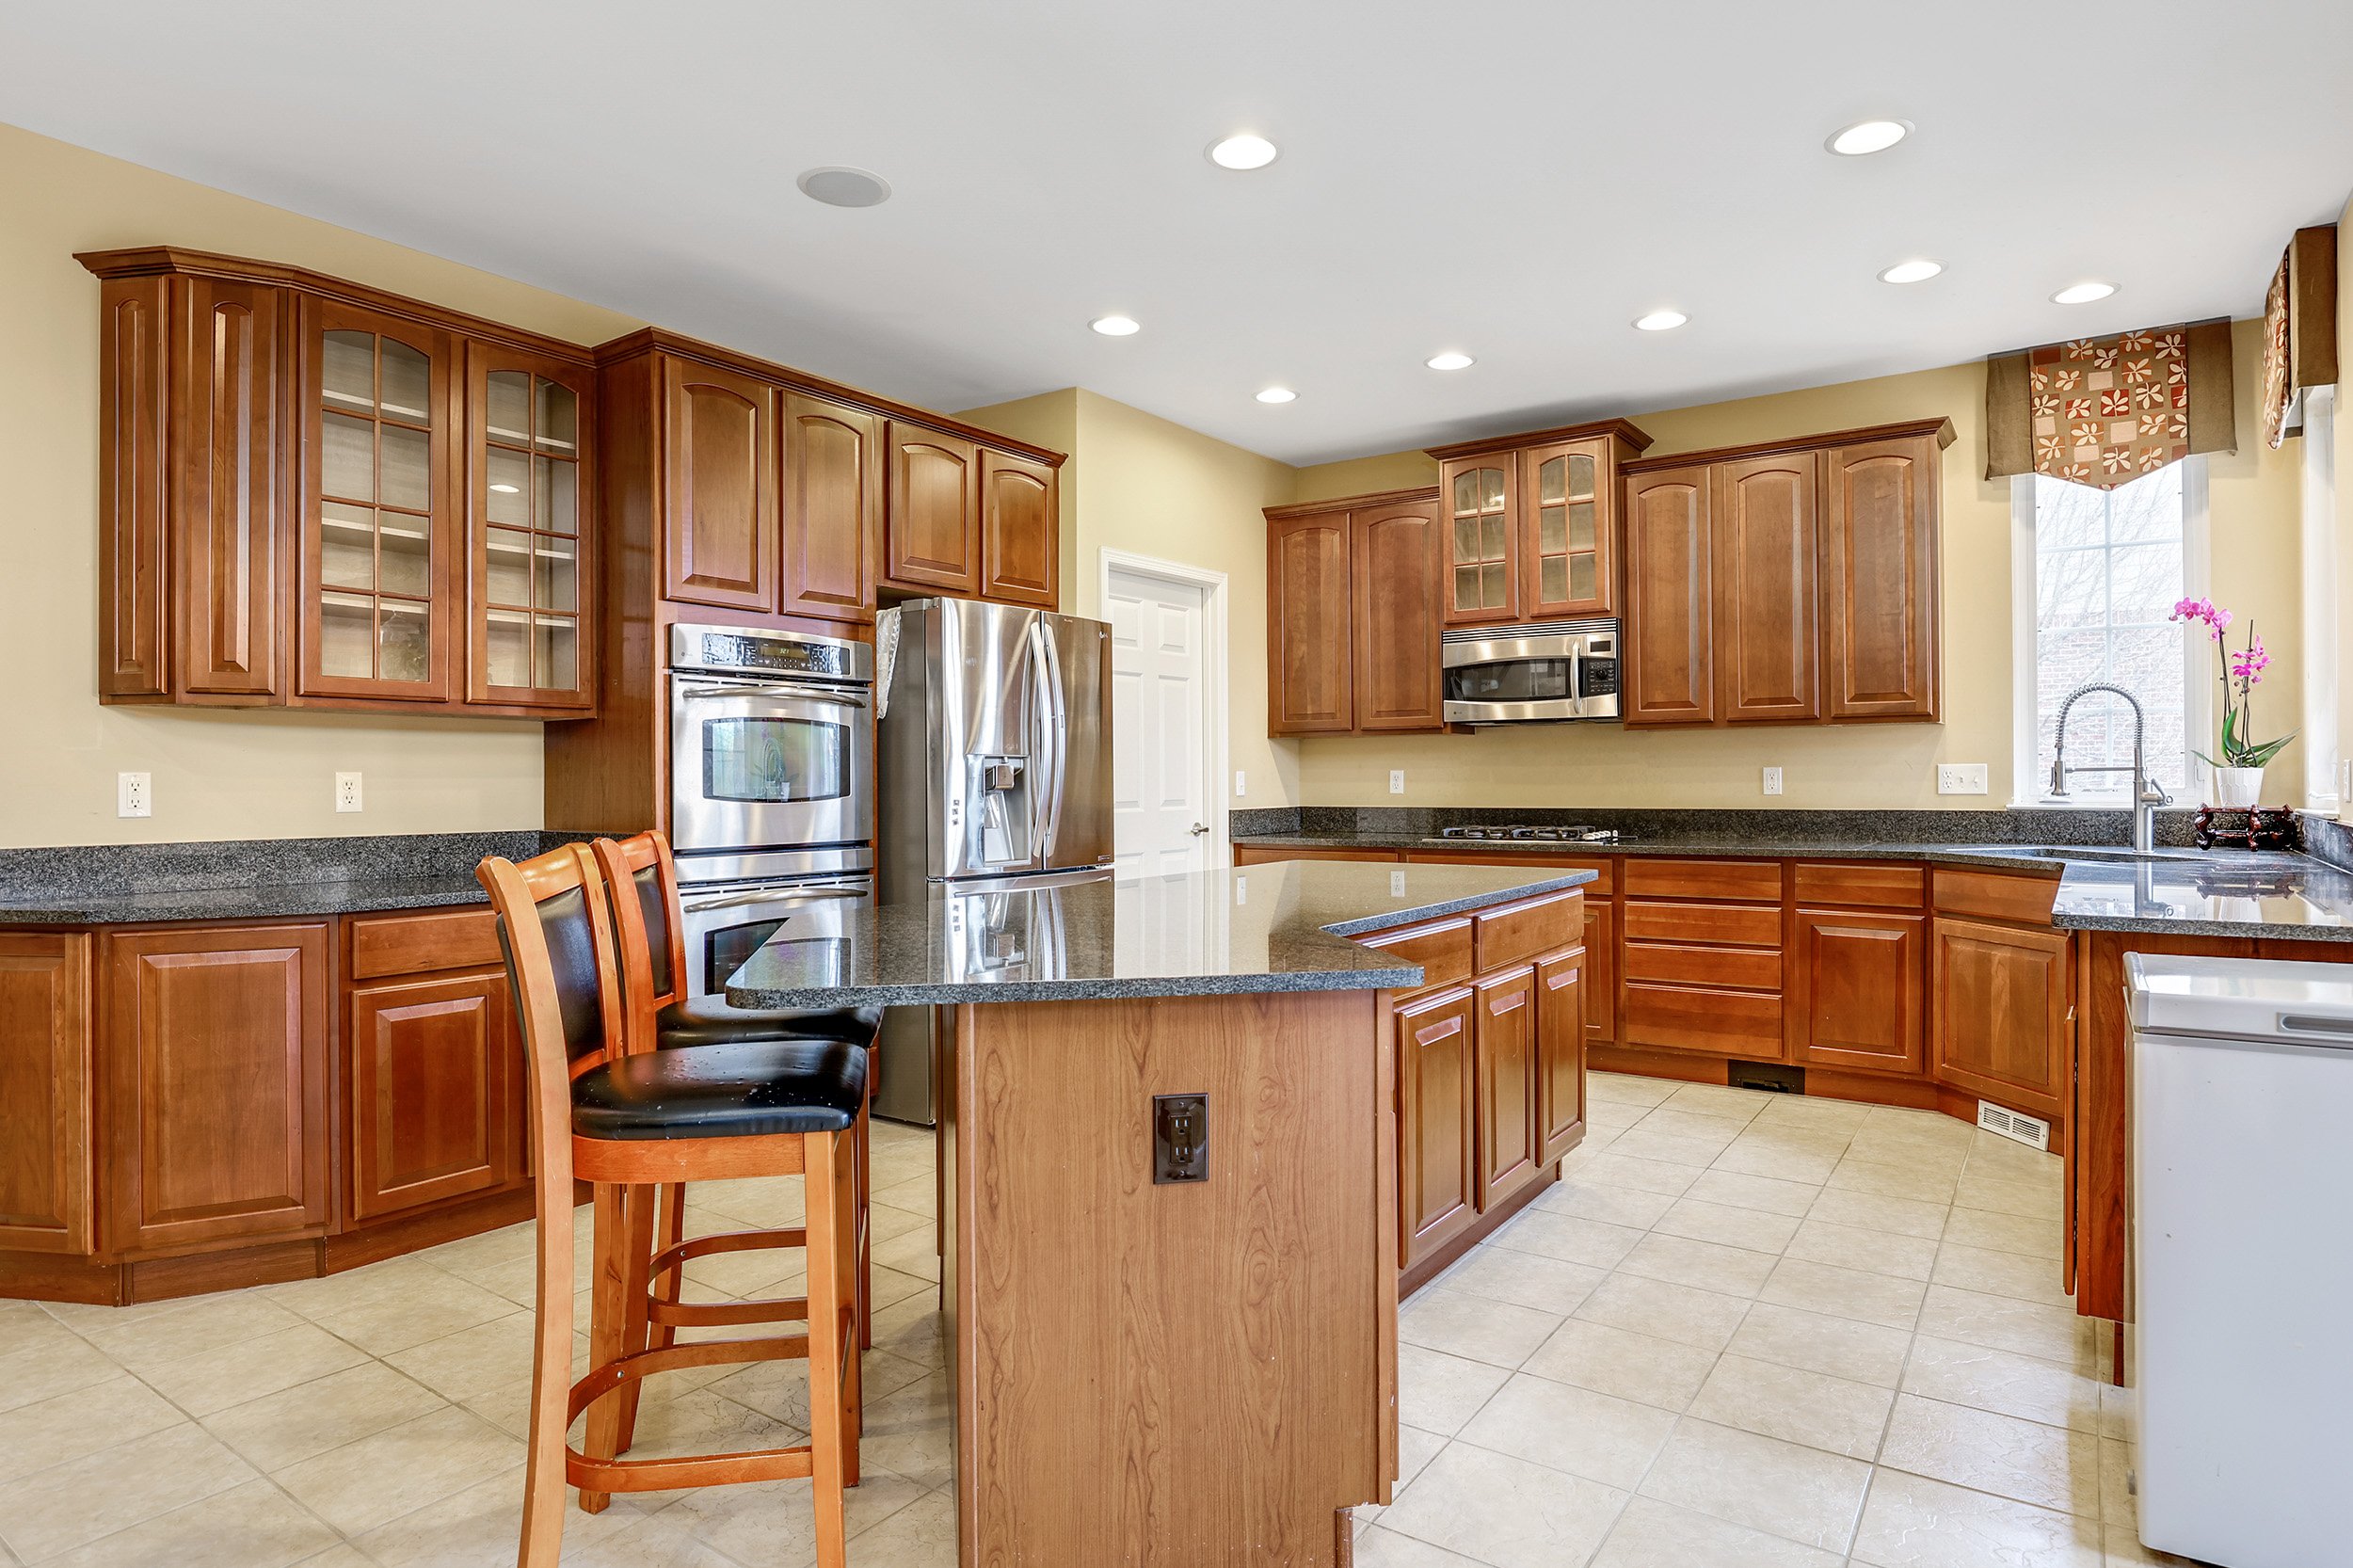  South Lyon Michigan Real Estate Photography - large open concept kitchen   